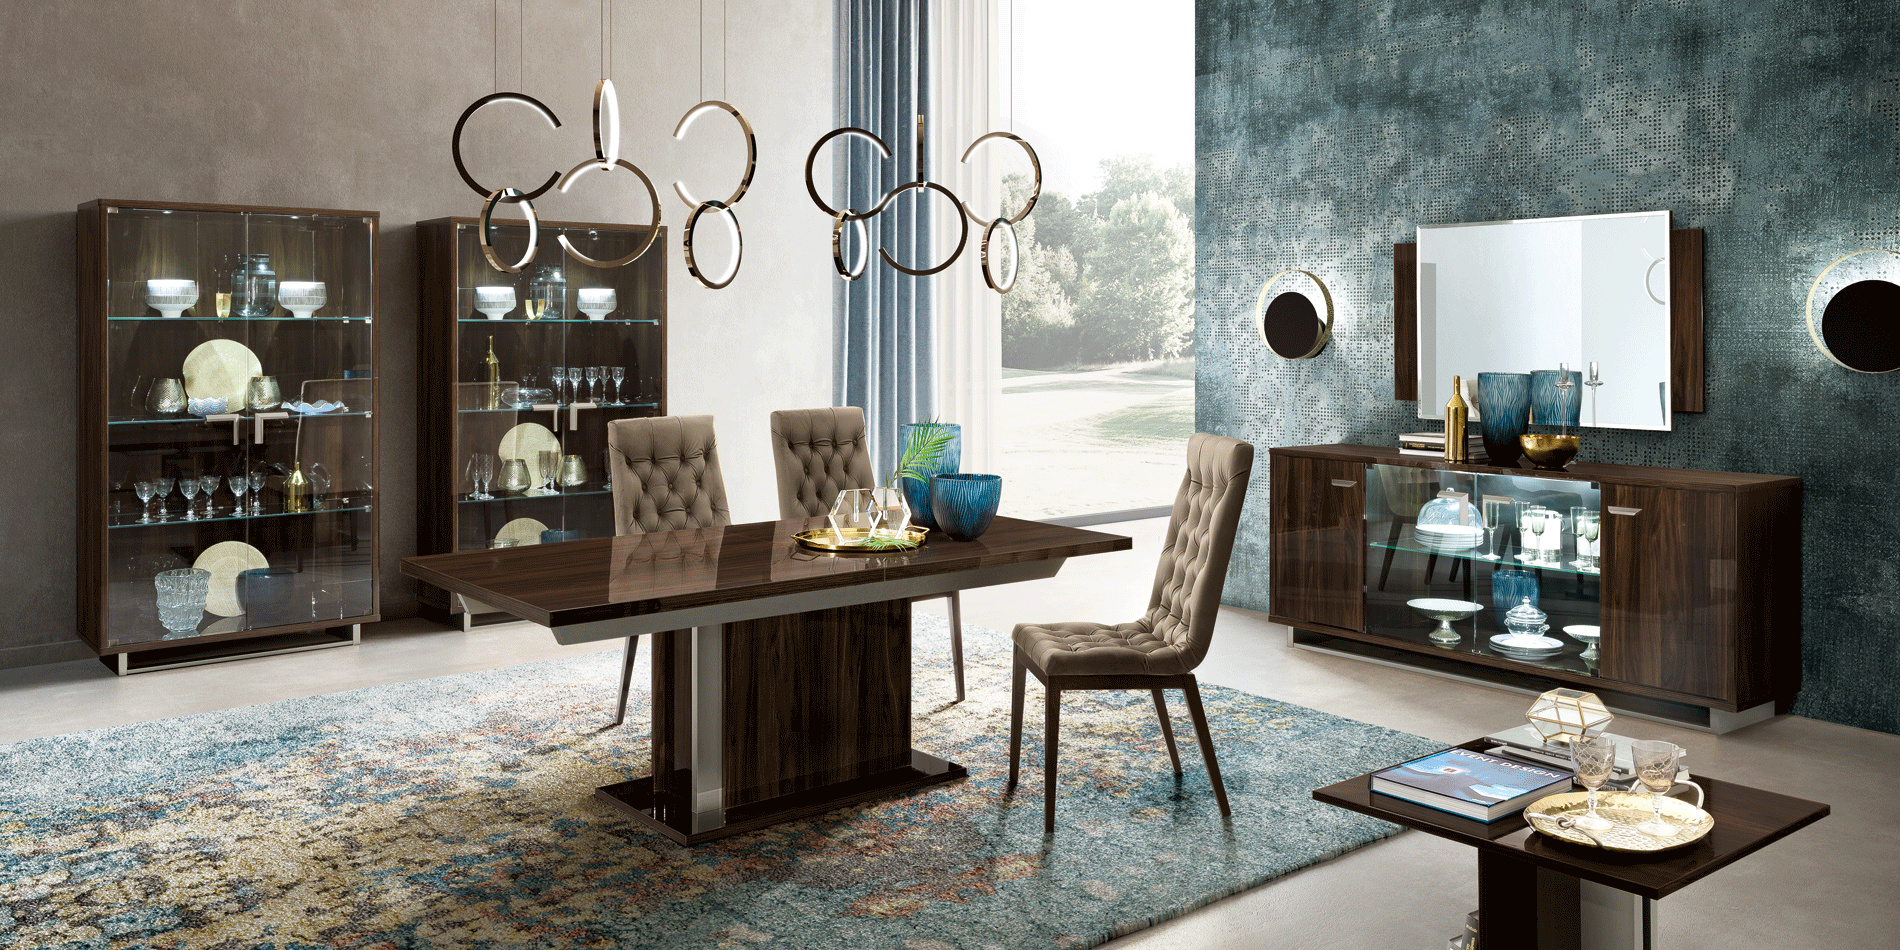 Brands Camel Classic Collection, Italy Volare Dining room Dark Walnut/Nickel Additional items